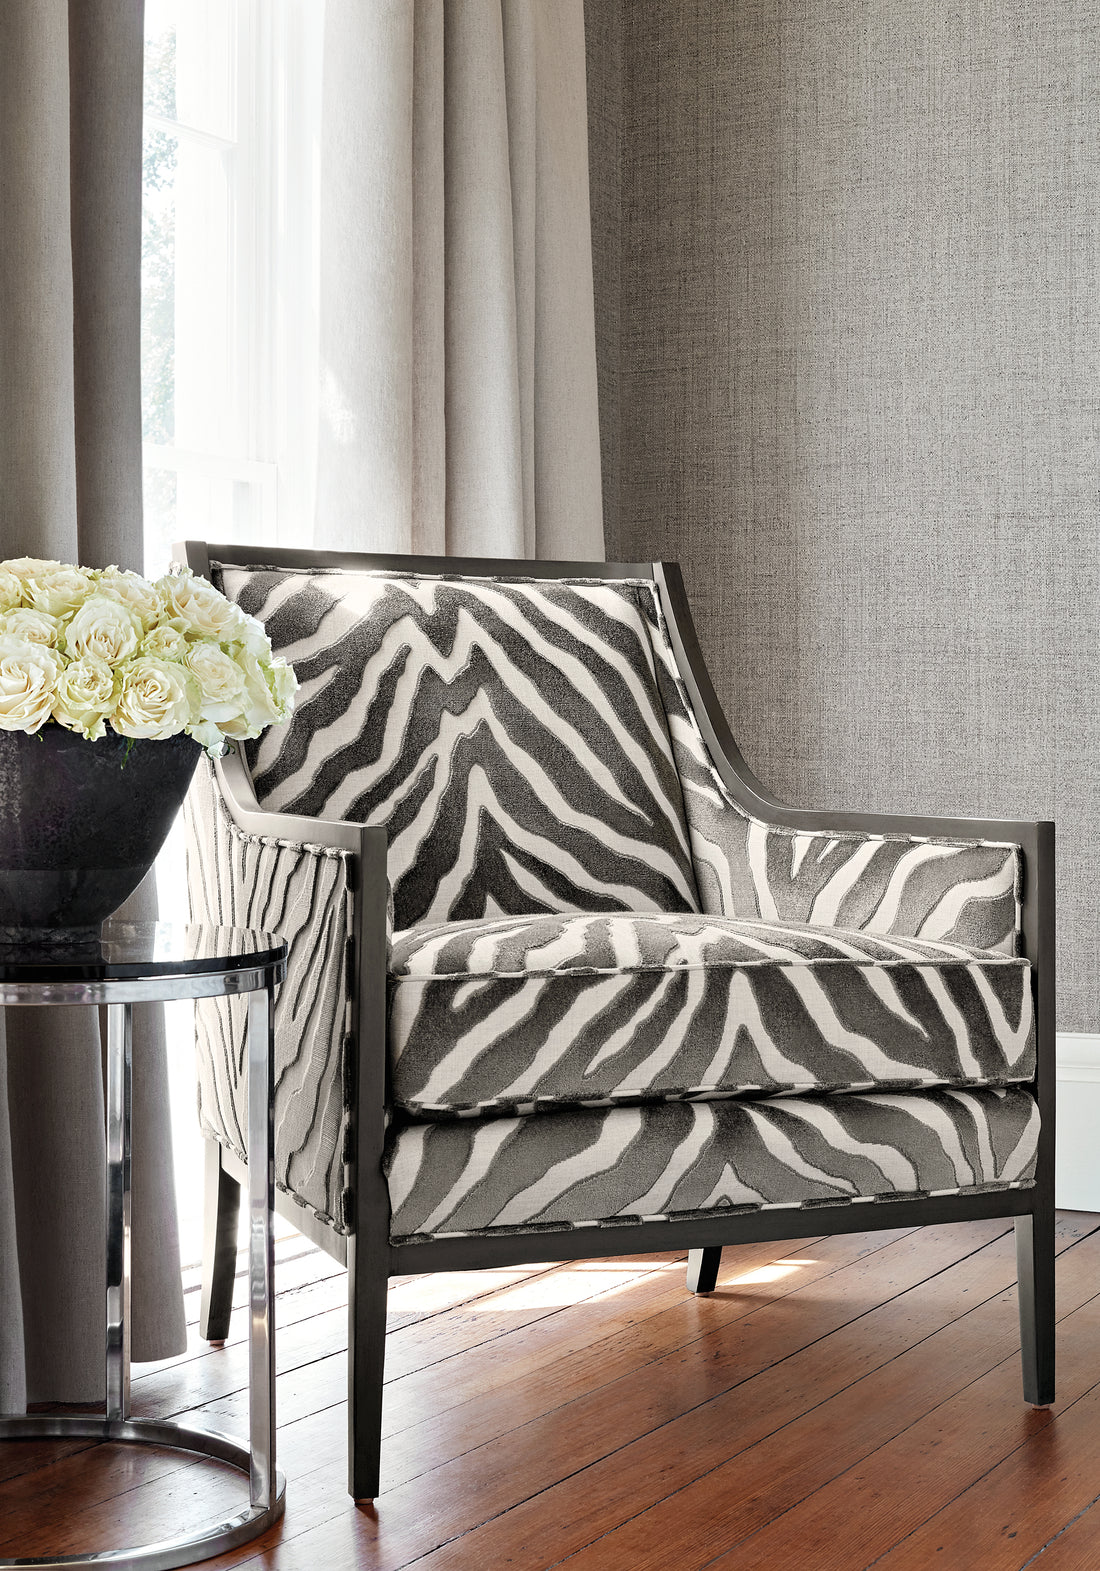 Pasadena Chair in Etosha Velvet woven fabric in graphite color - pattern number W80404 - by Thibaut in the Woven Resource Vol 10 Menagerie collection